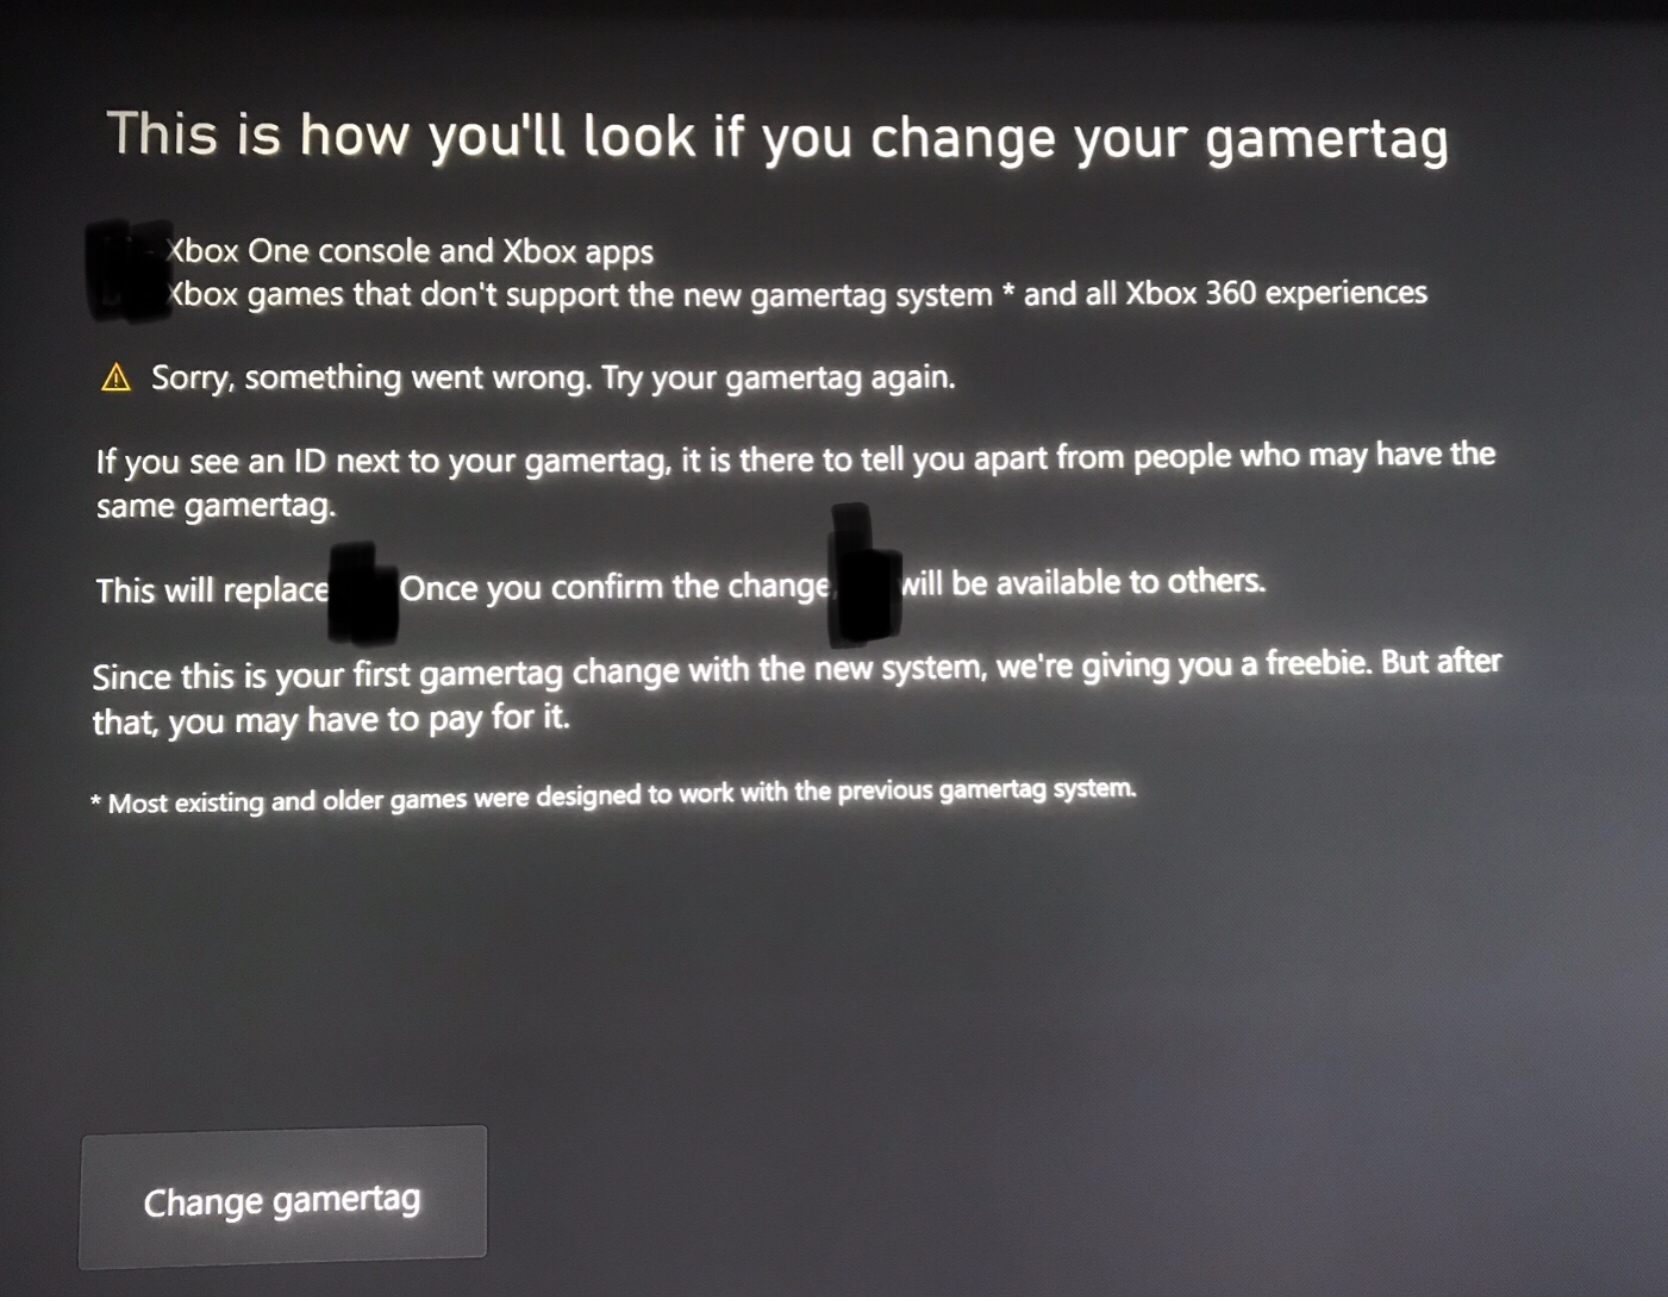 How To Change Your Gamertag On Xbox